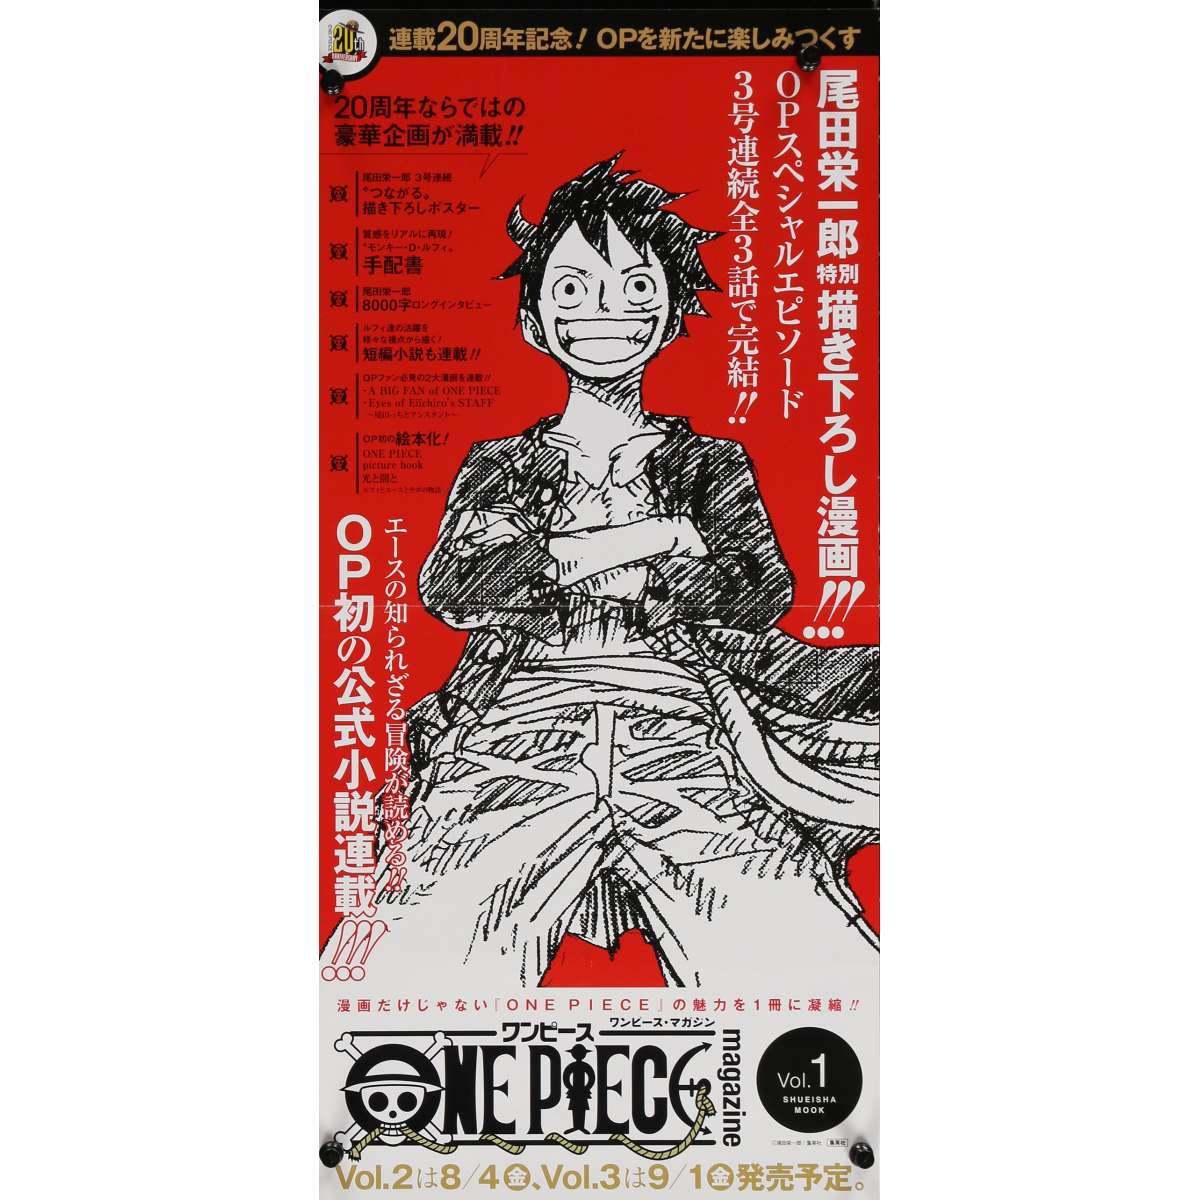 One Piece Ad Poster